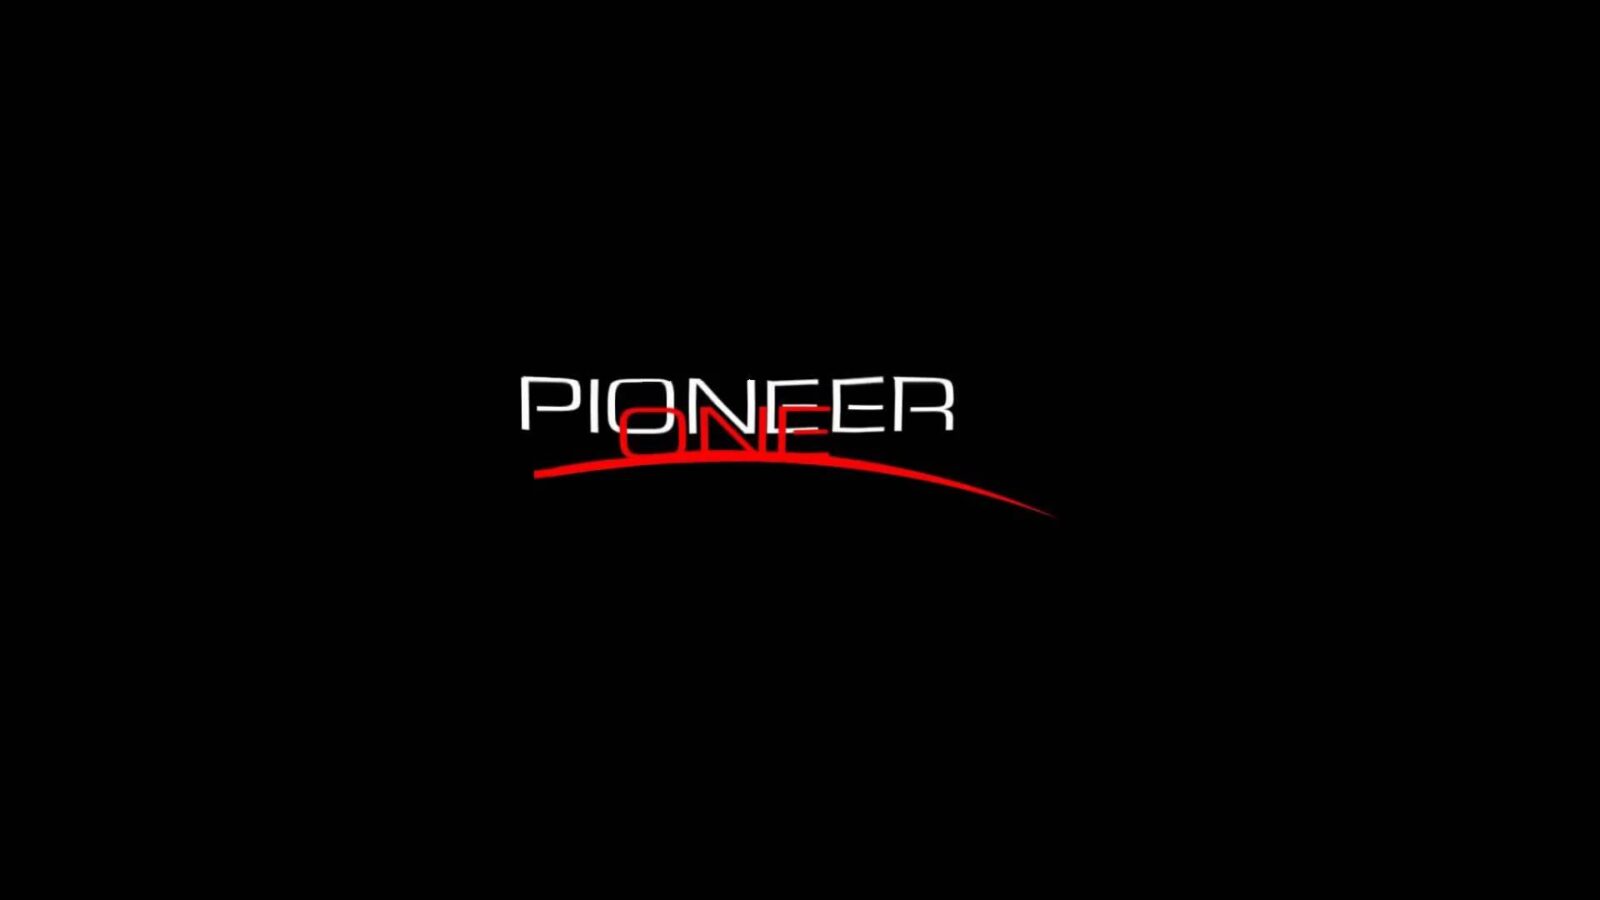 LiveWallpapers4Free.com | Pioneer One Logo - Free Live Wallpaper